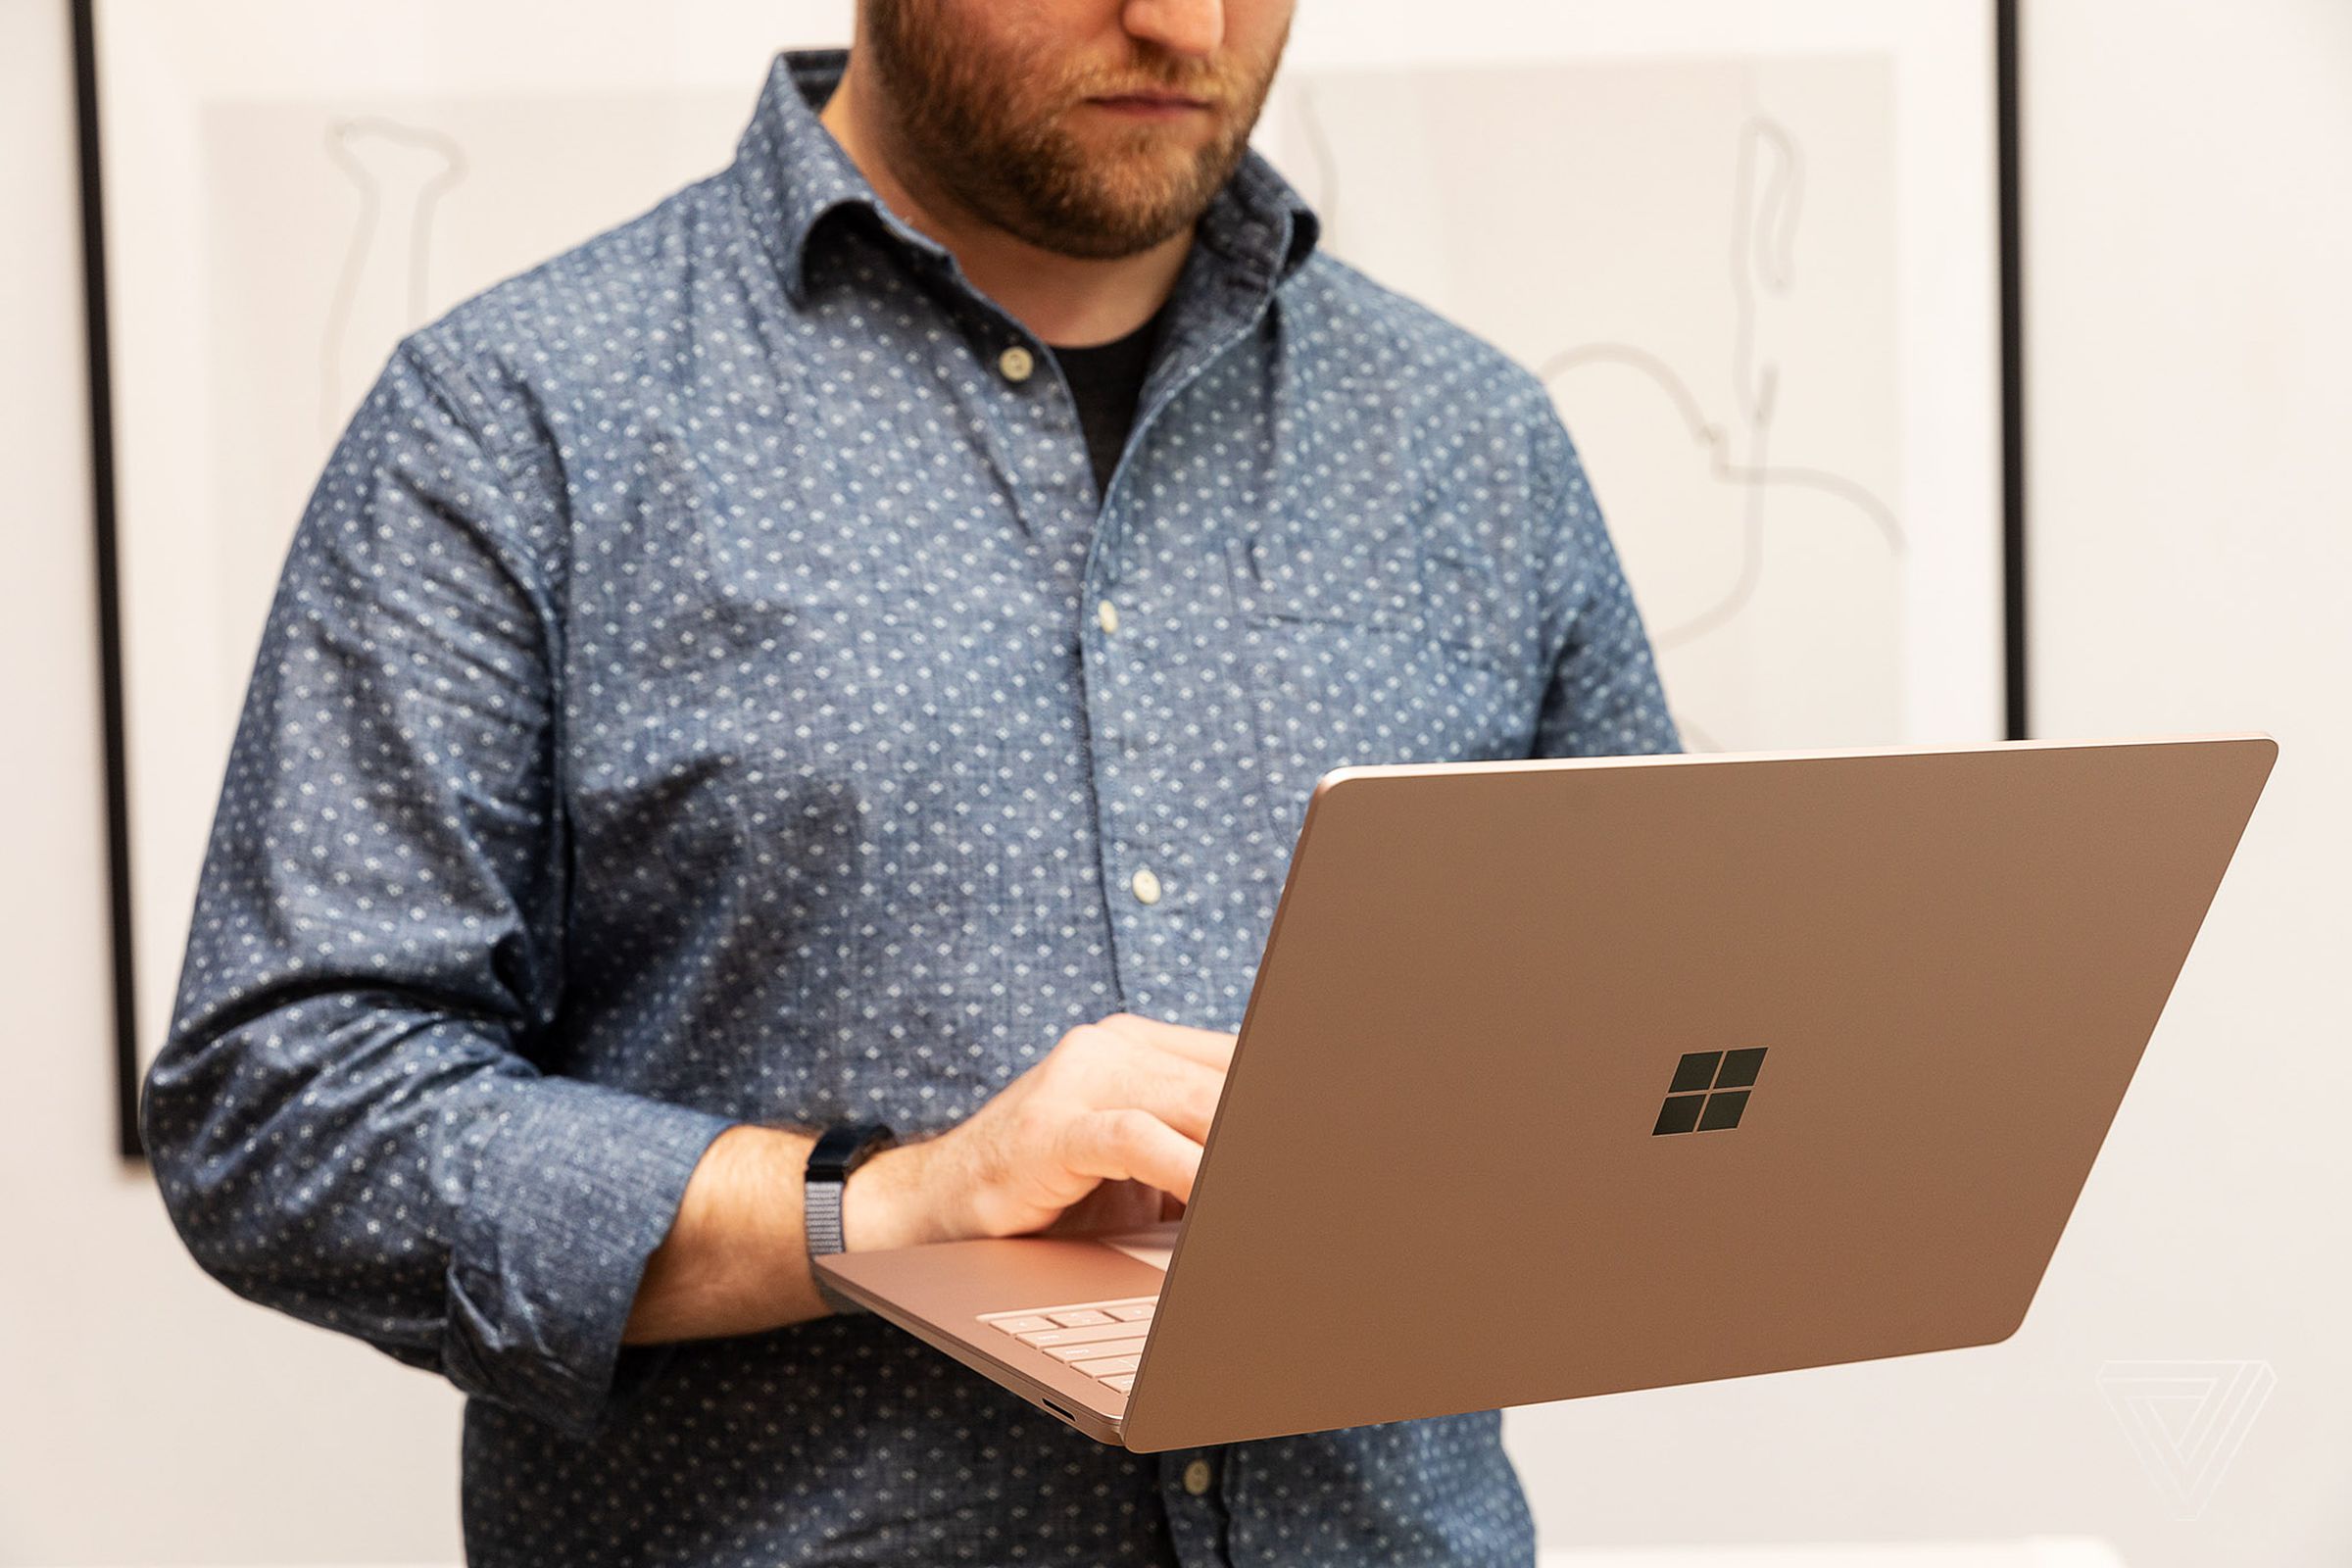 Microsoft’s Surface devices scored only slightly higher than Apple’s